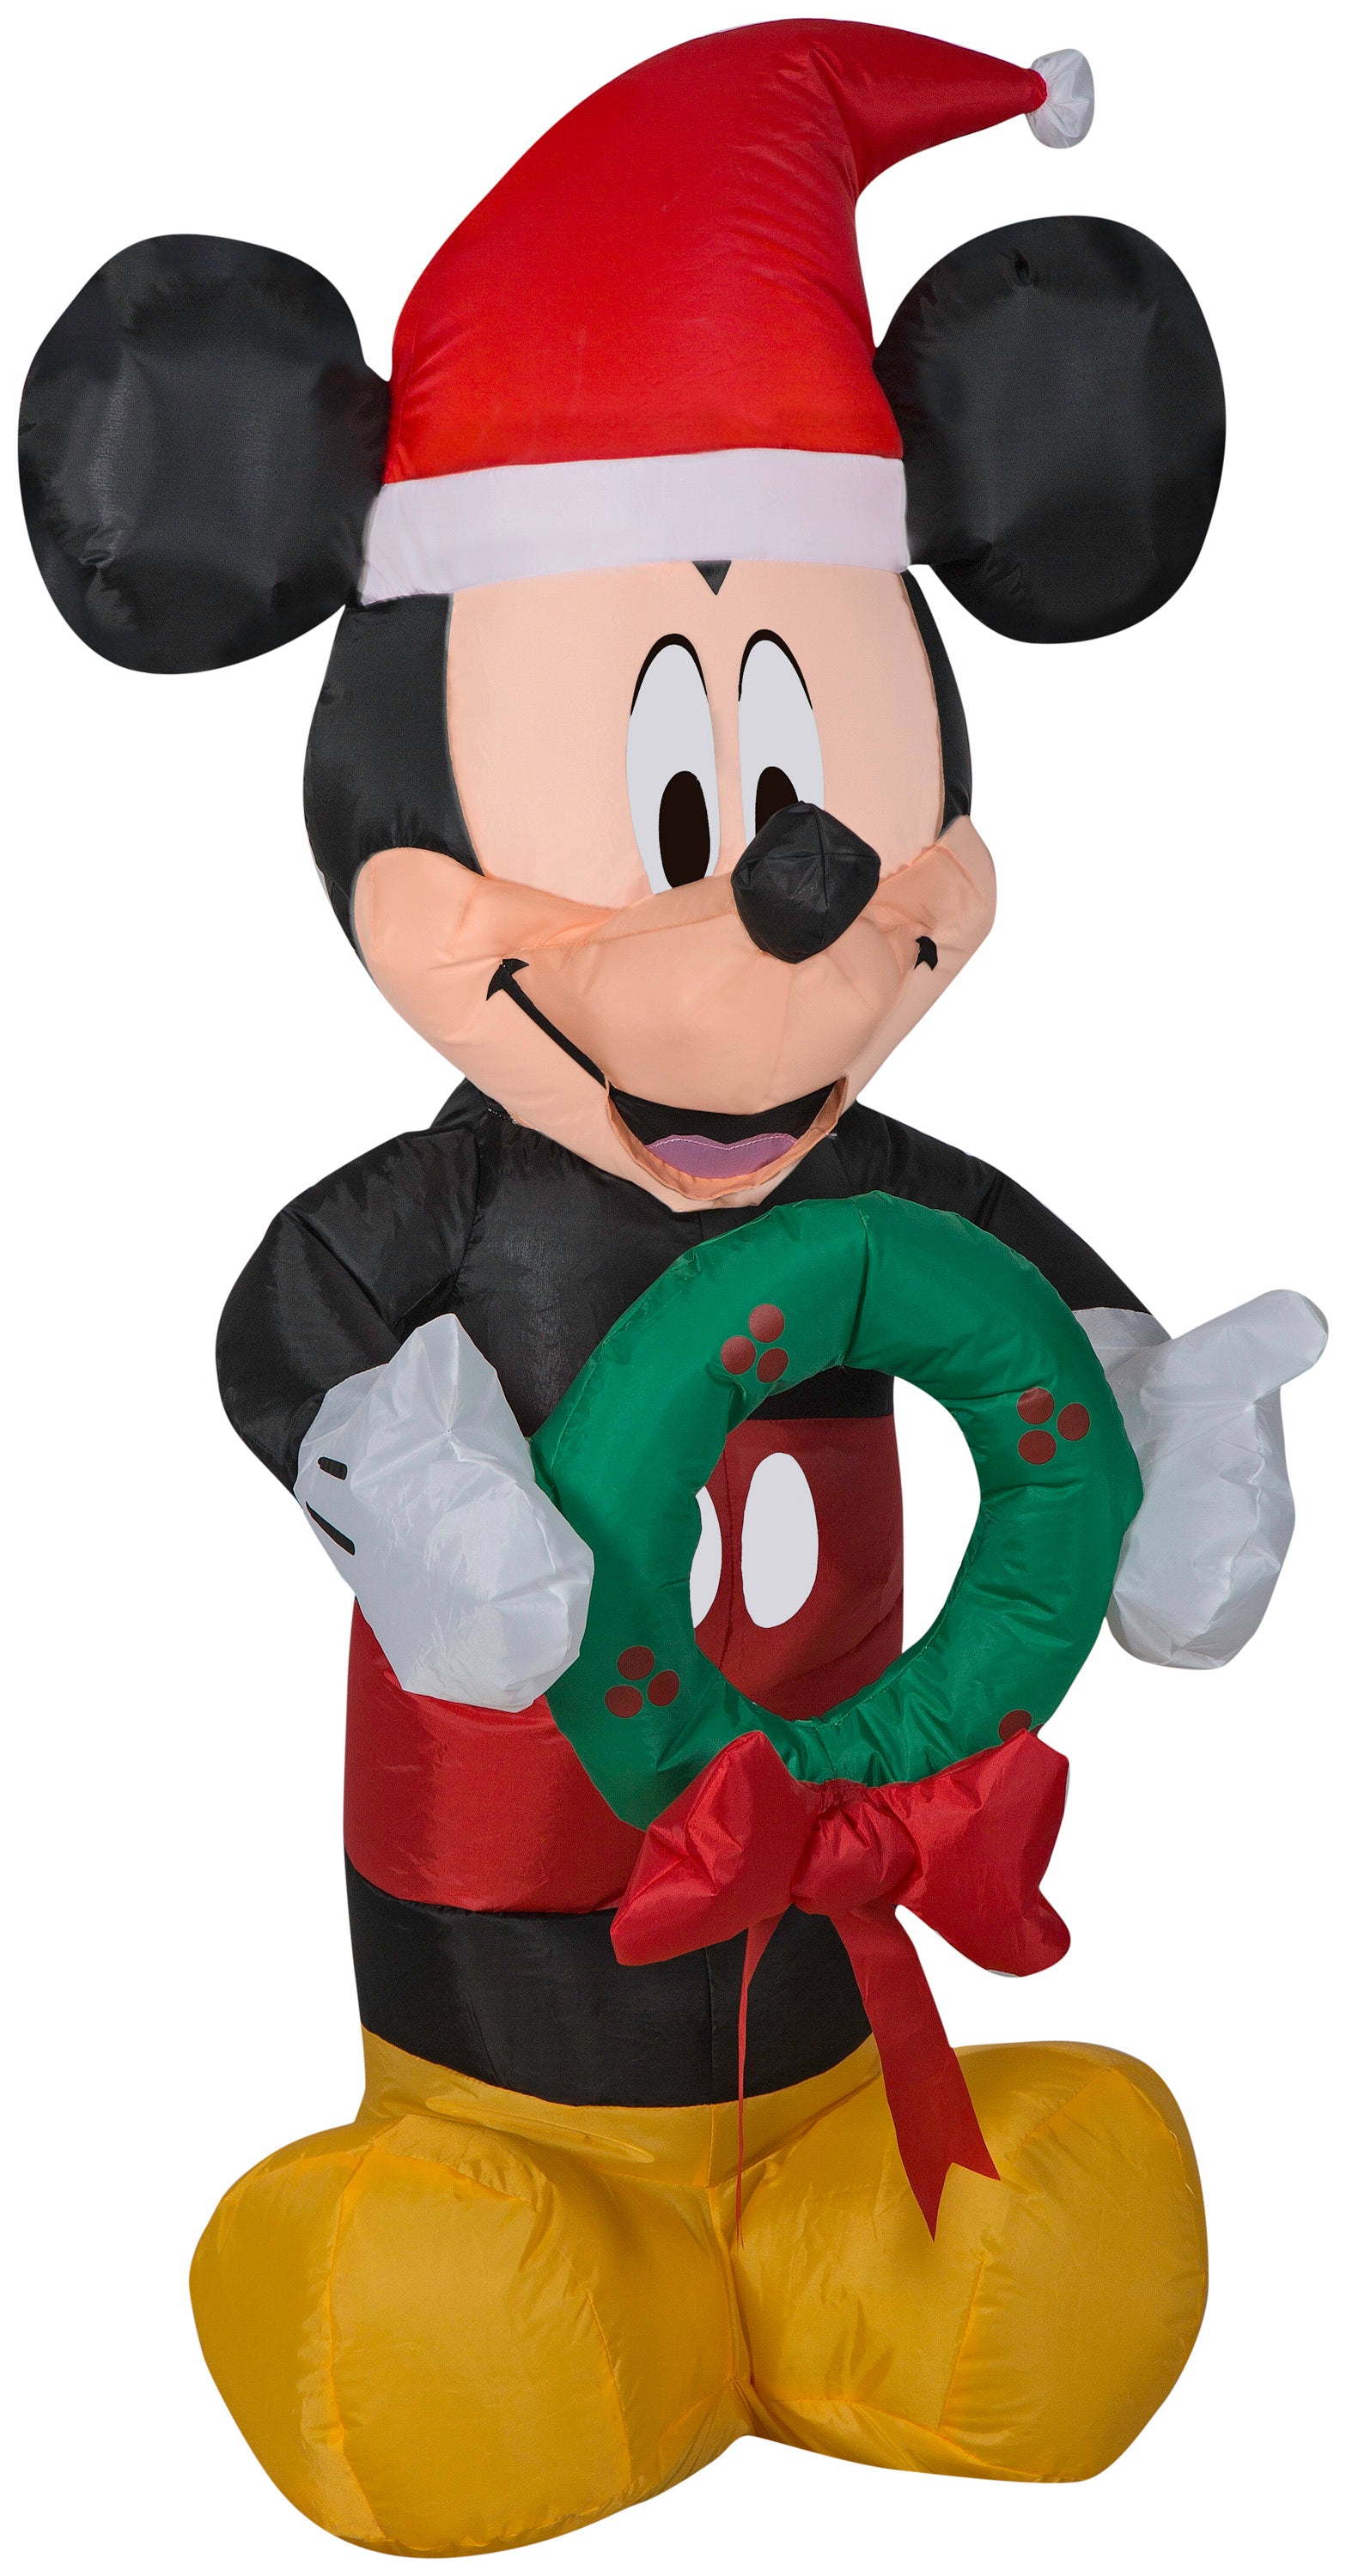 3.5' Disney Airblown Mickey Mouse Holding Wreath Christmas Inflatable